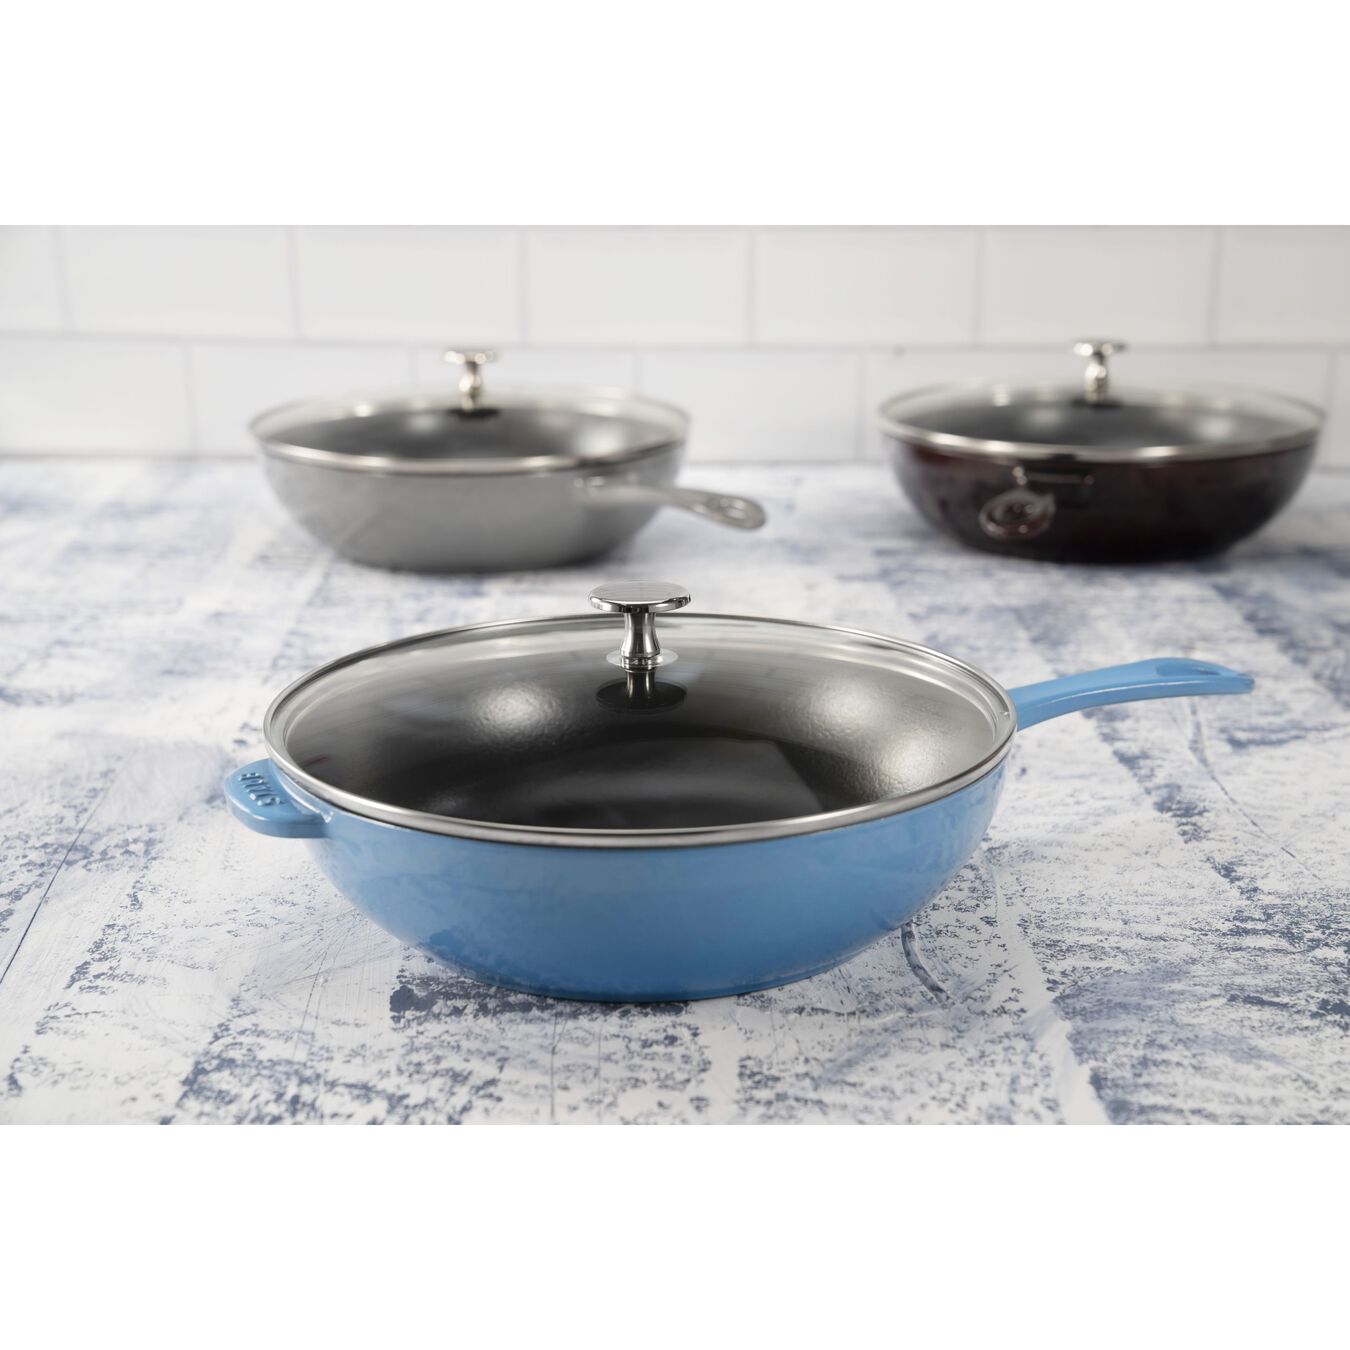 26 cm / 10 inch cast iron DAILY PAN WITH GLASS LID, ice-blue - Visual Imperfections,,large 2